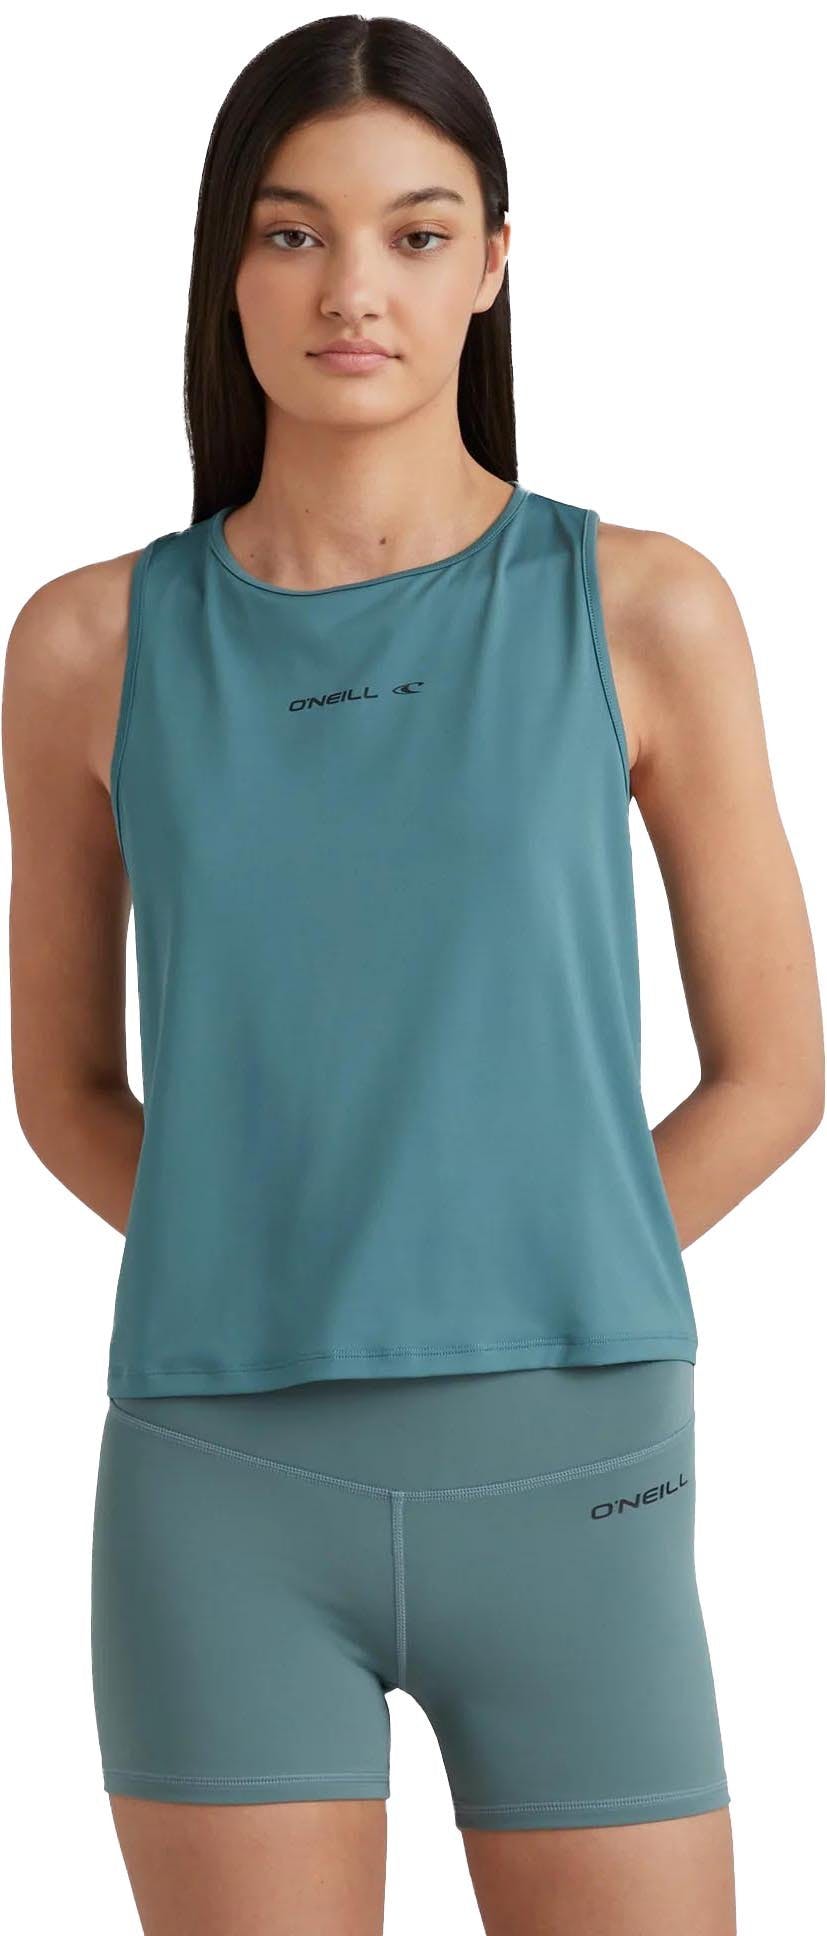 Product image for Rutile Tank Top Basic - Women’s